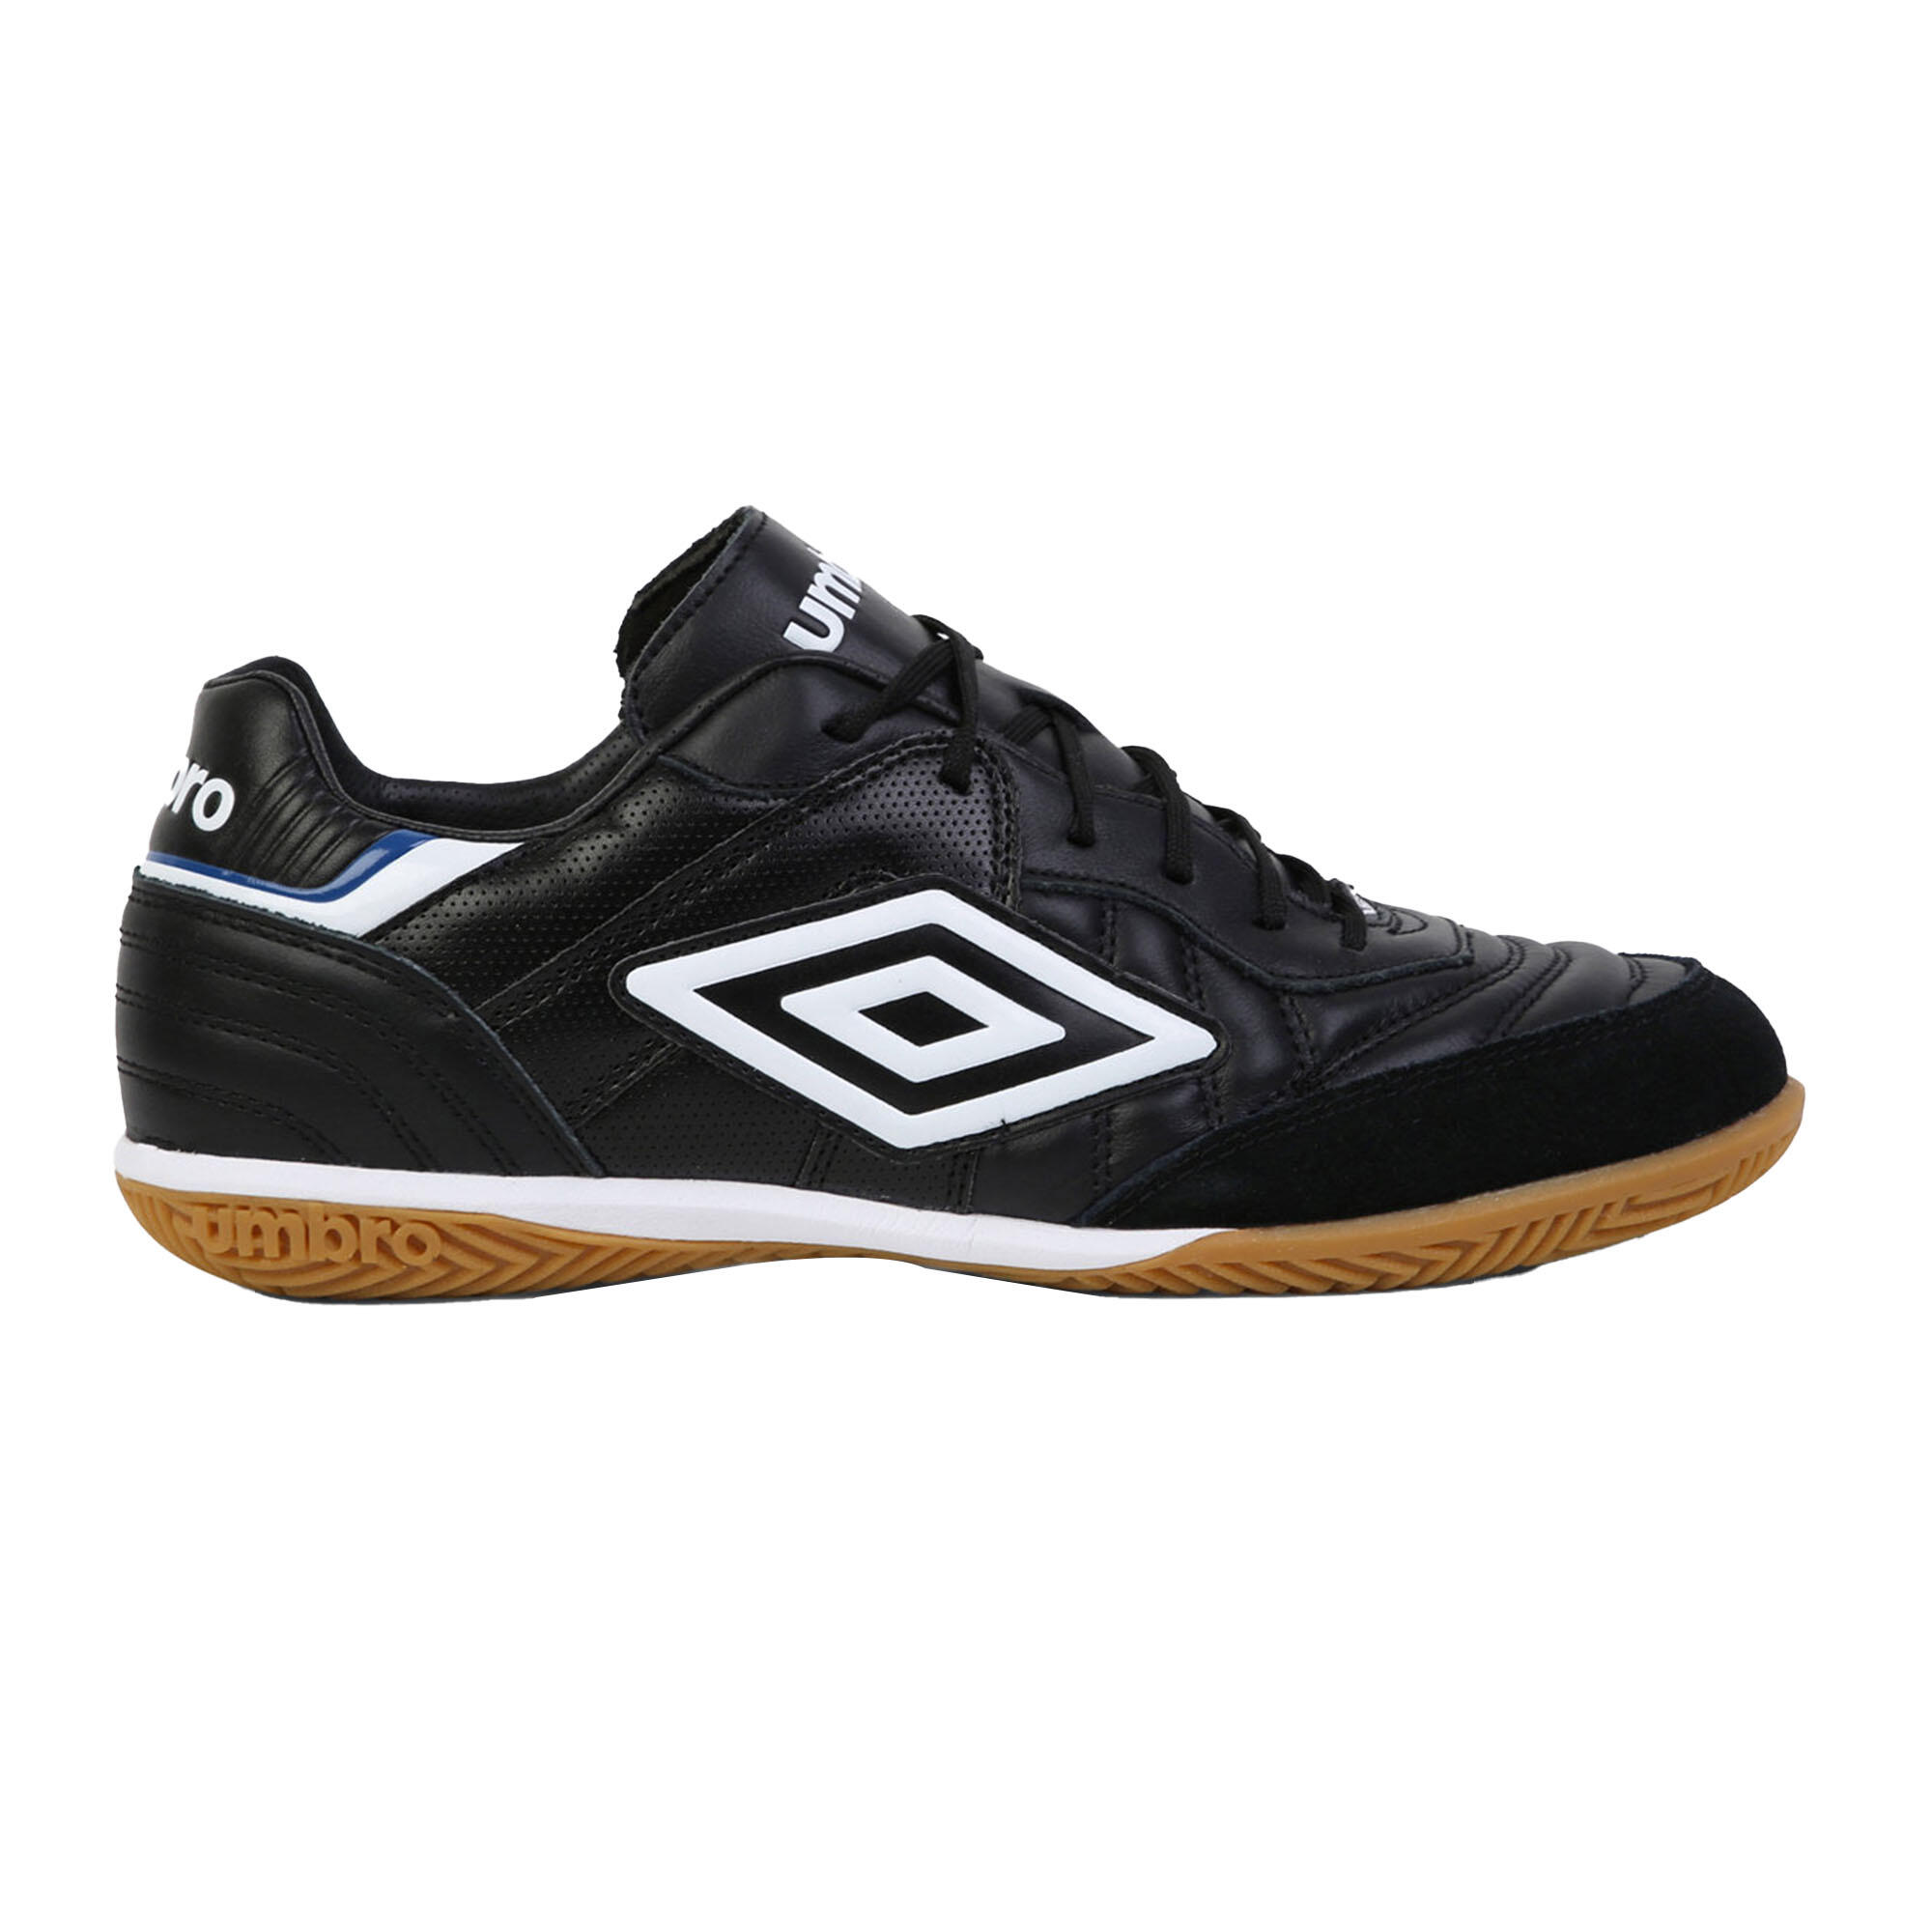 Mens Speciali Eternal Team Nt Leather Trainers (Black/White/Royal Blue) 4/4